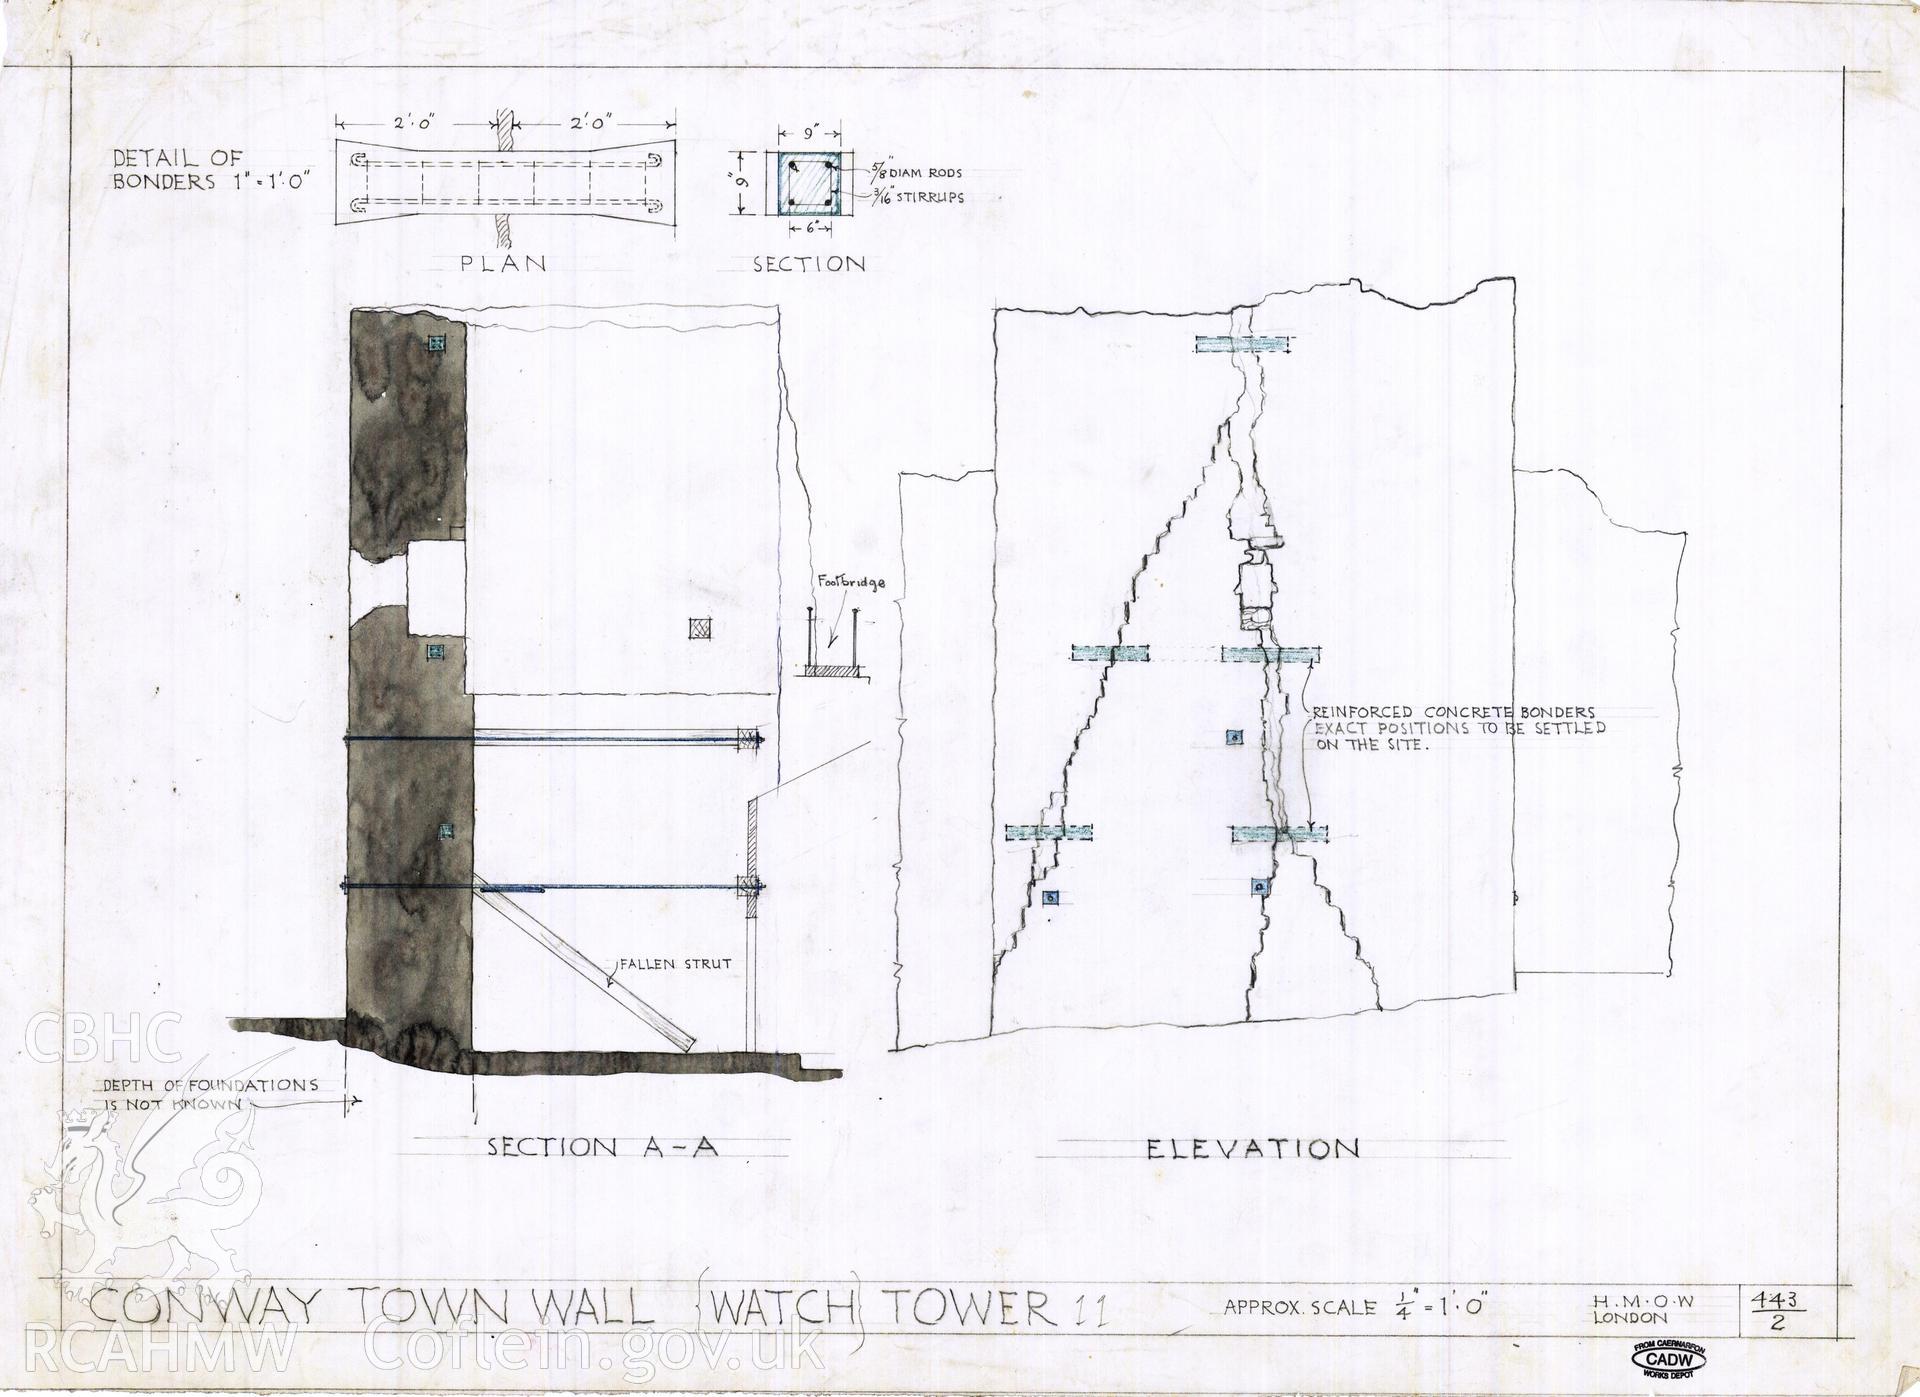 Cadw guardianship monument drawing of Conwy Walls. Tower 11, struts and ties, elevs. Cadw Ref. No:443/2. Scale 1:48.